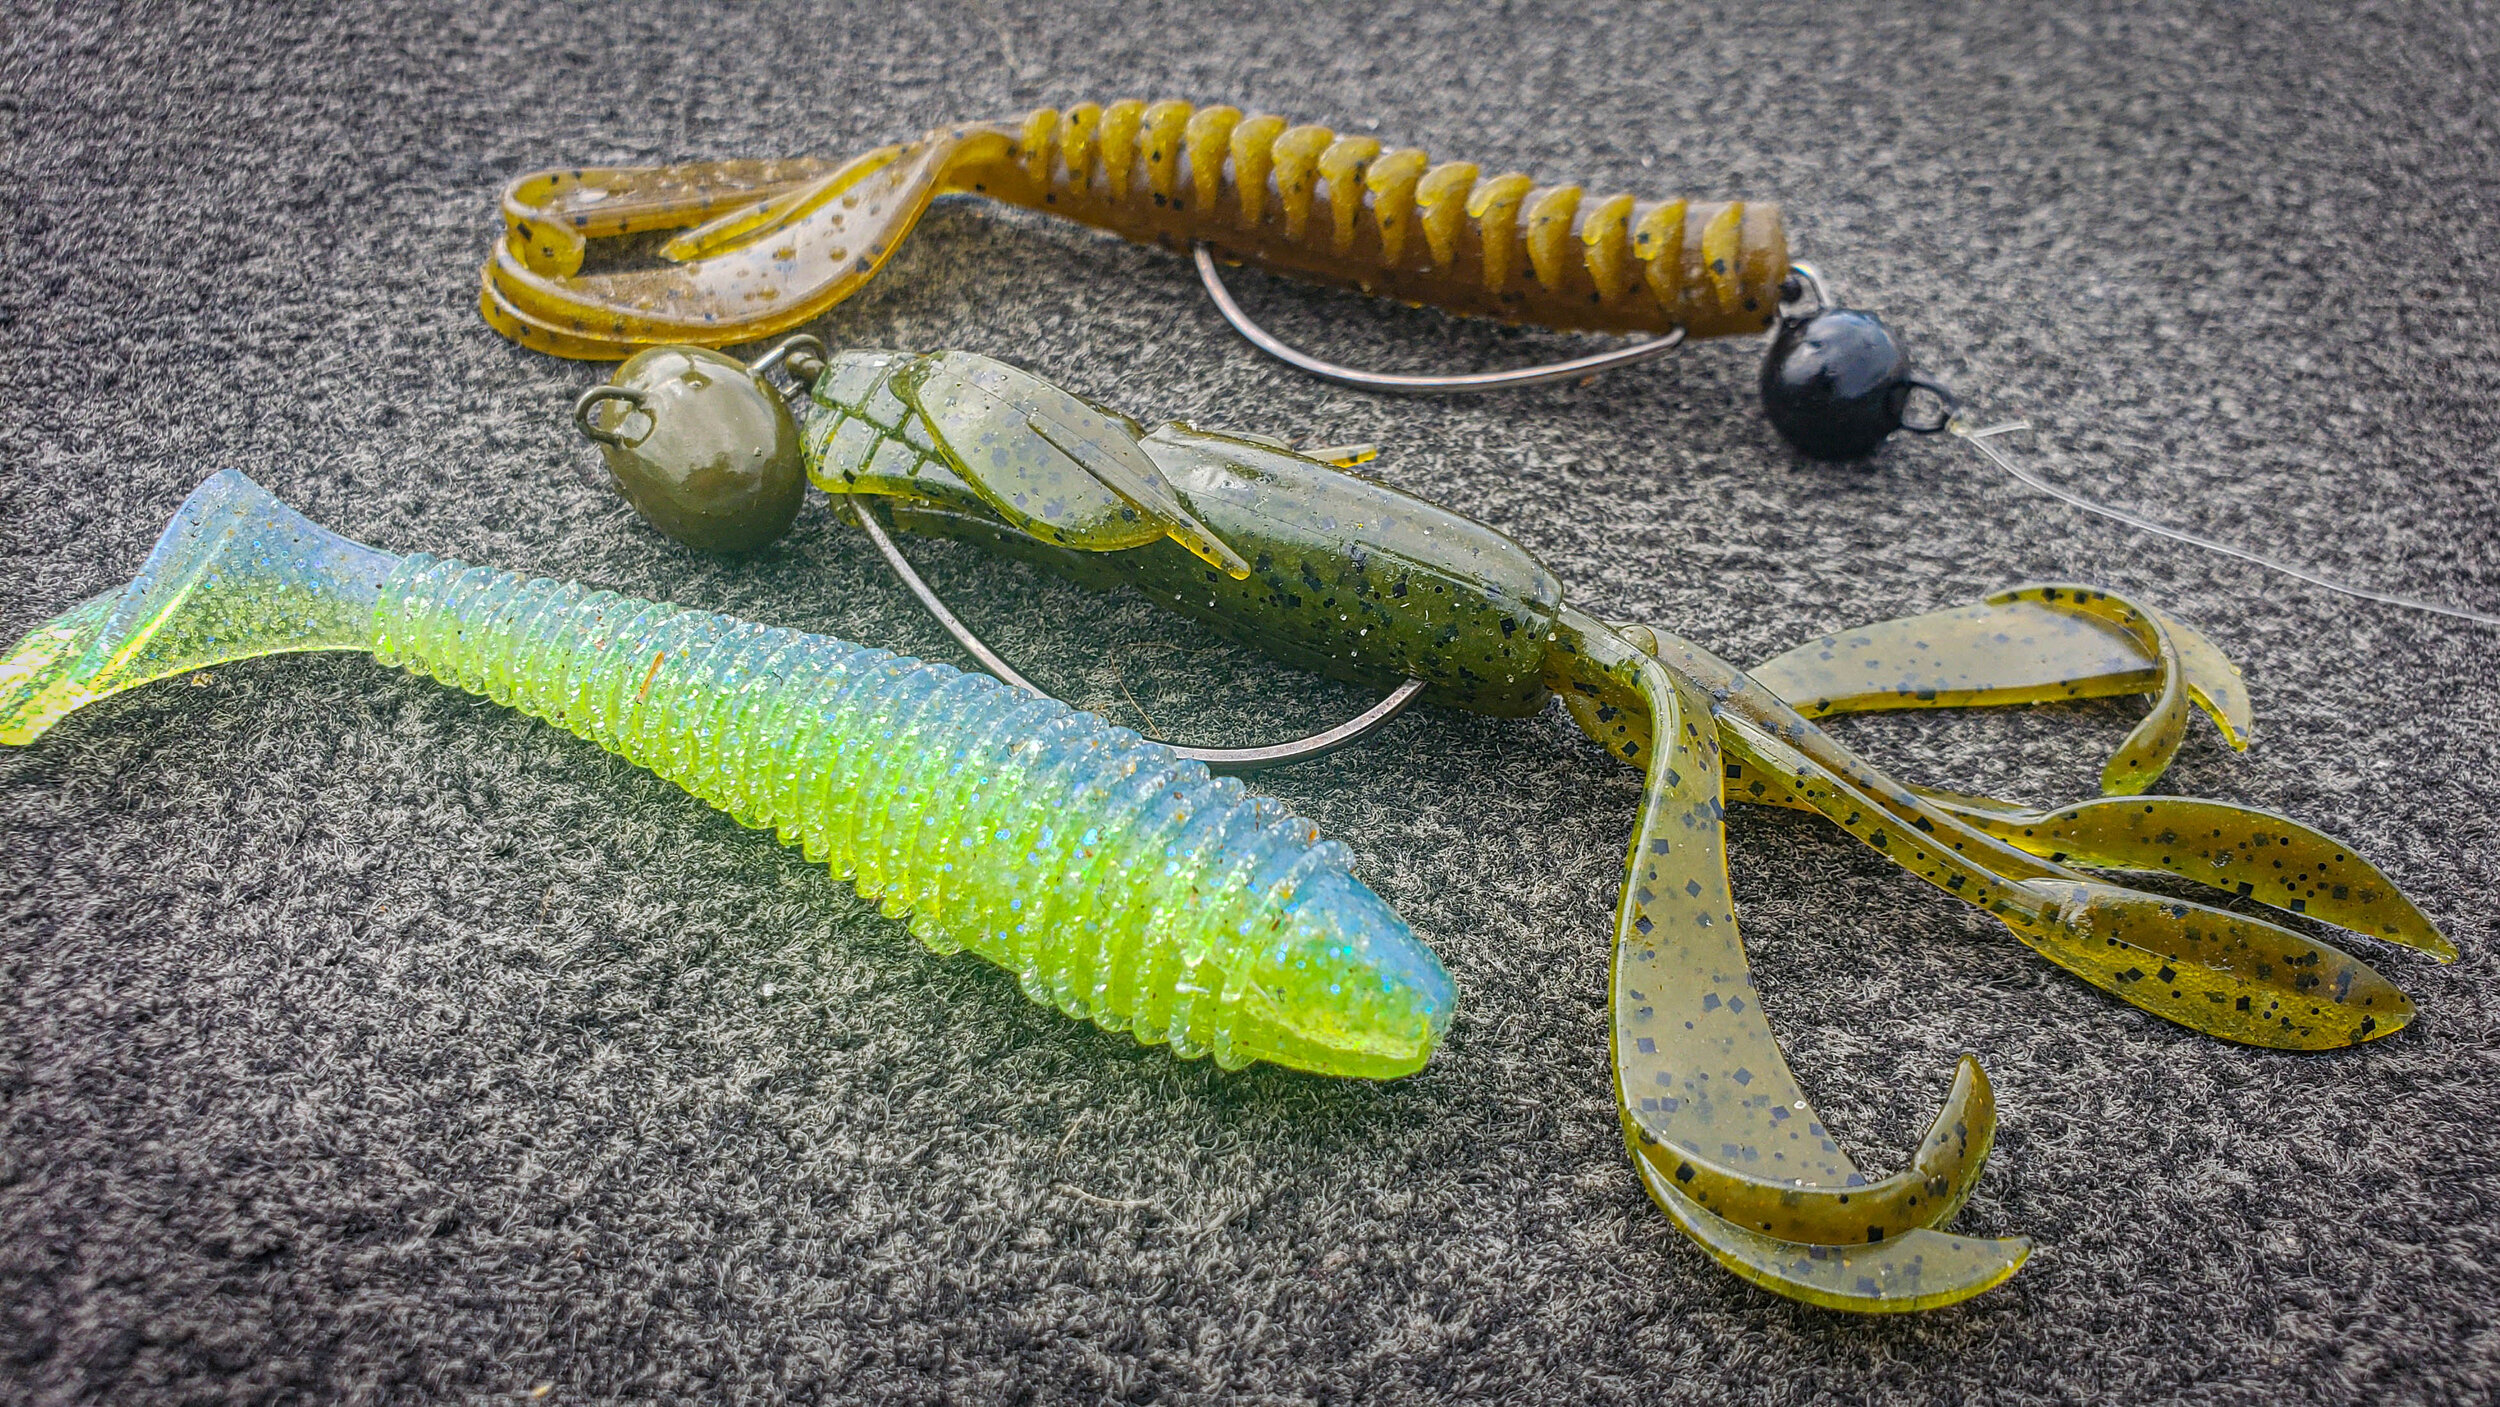 New Tungsten Wobble Head Jig pairs perfectly with the Adrenaline